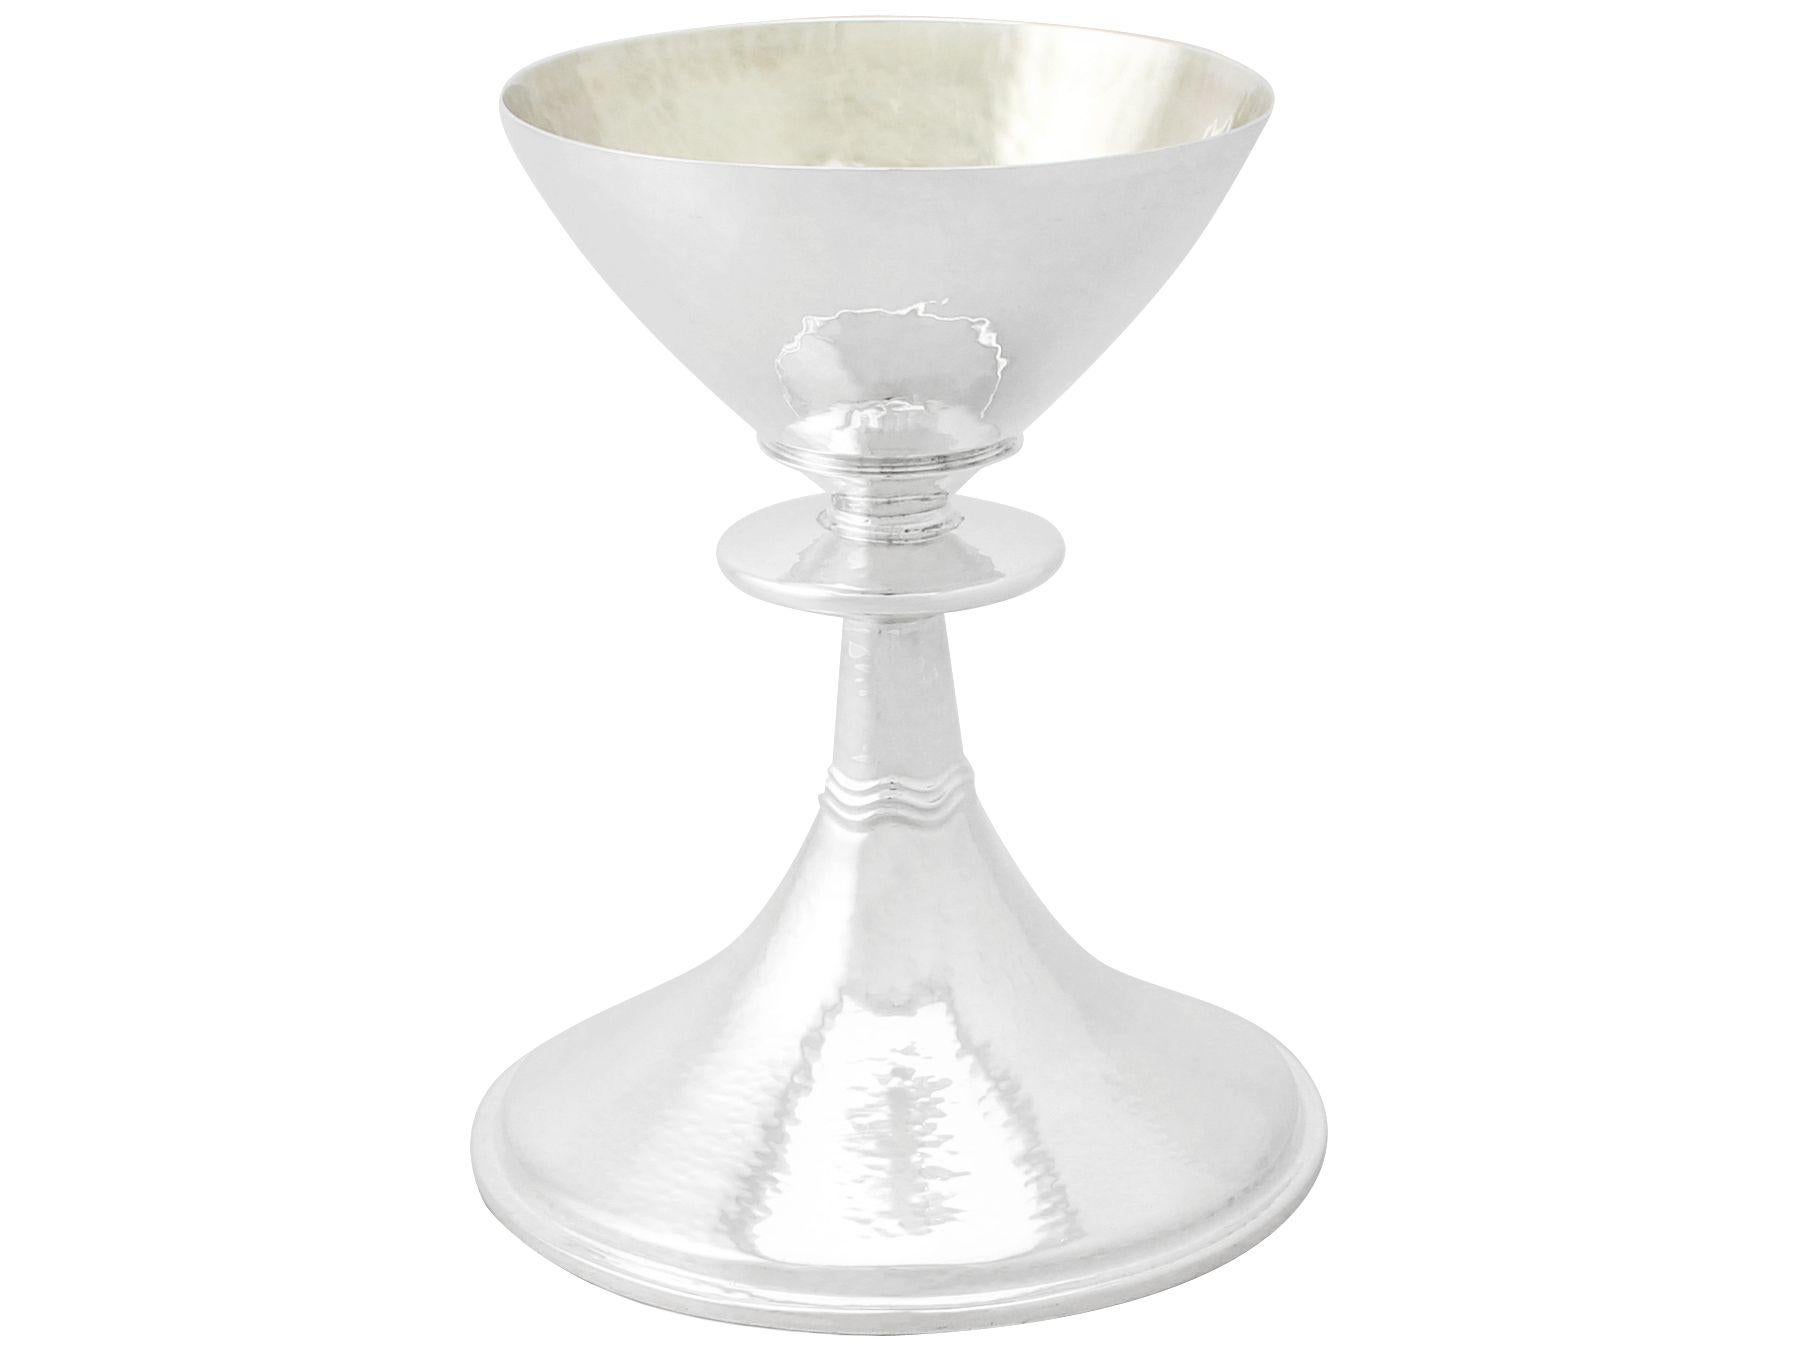 An exceptional, fine and impressive vintage George VI English sterling silver chalice in the Arts & Crafts style; an addition to our religious silverware collection.

This exceptional vintage George VI sterling silver ecclesiastical chalice has a